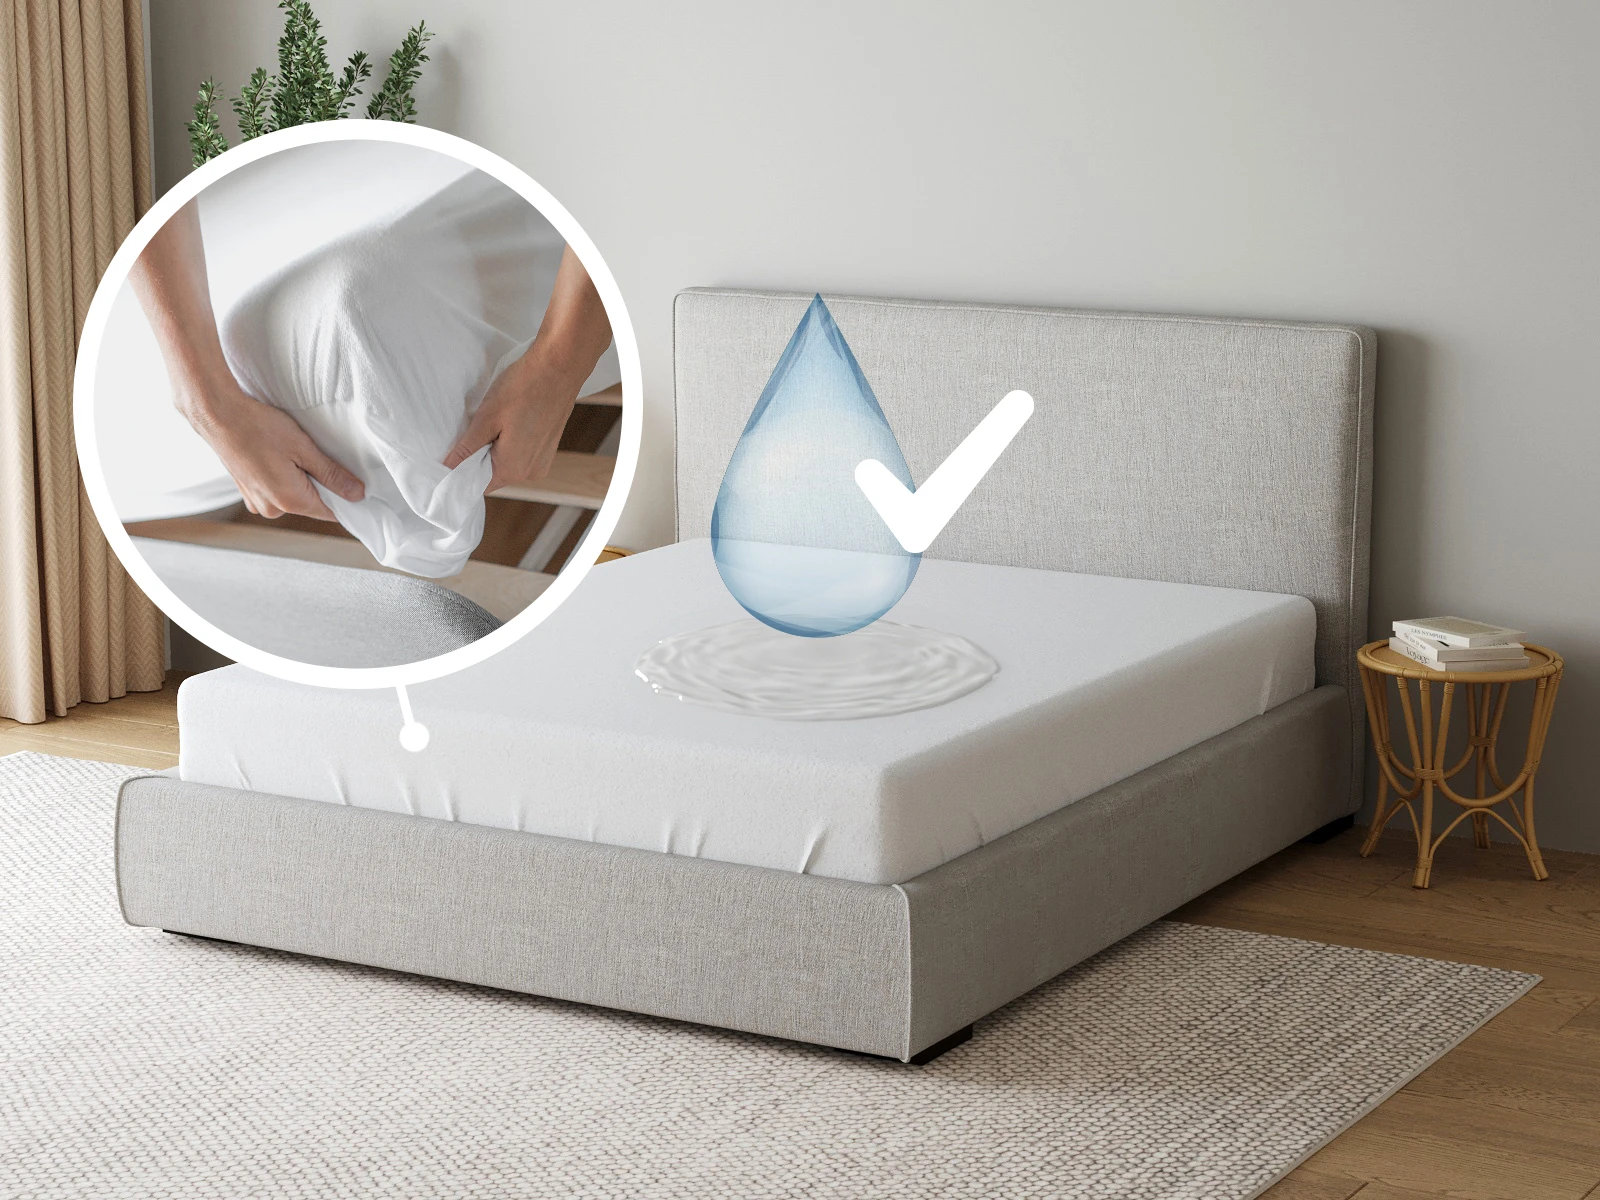 1 Waterproof mattress protector all-round protective cover 100x200cm